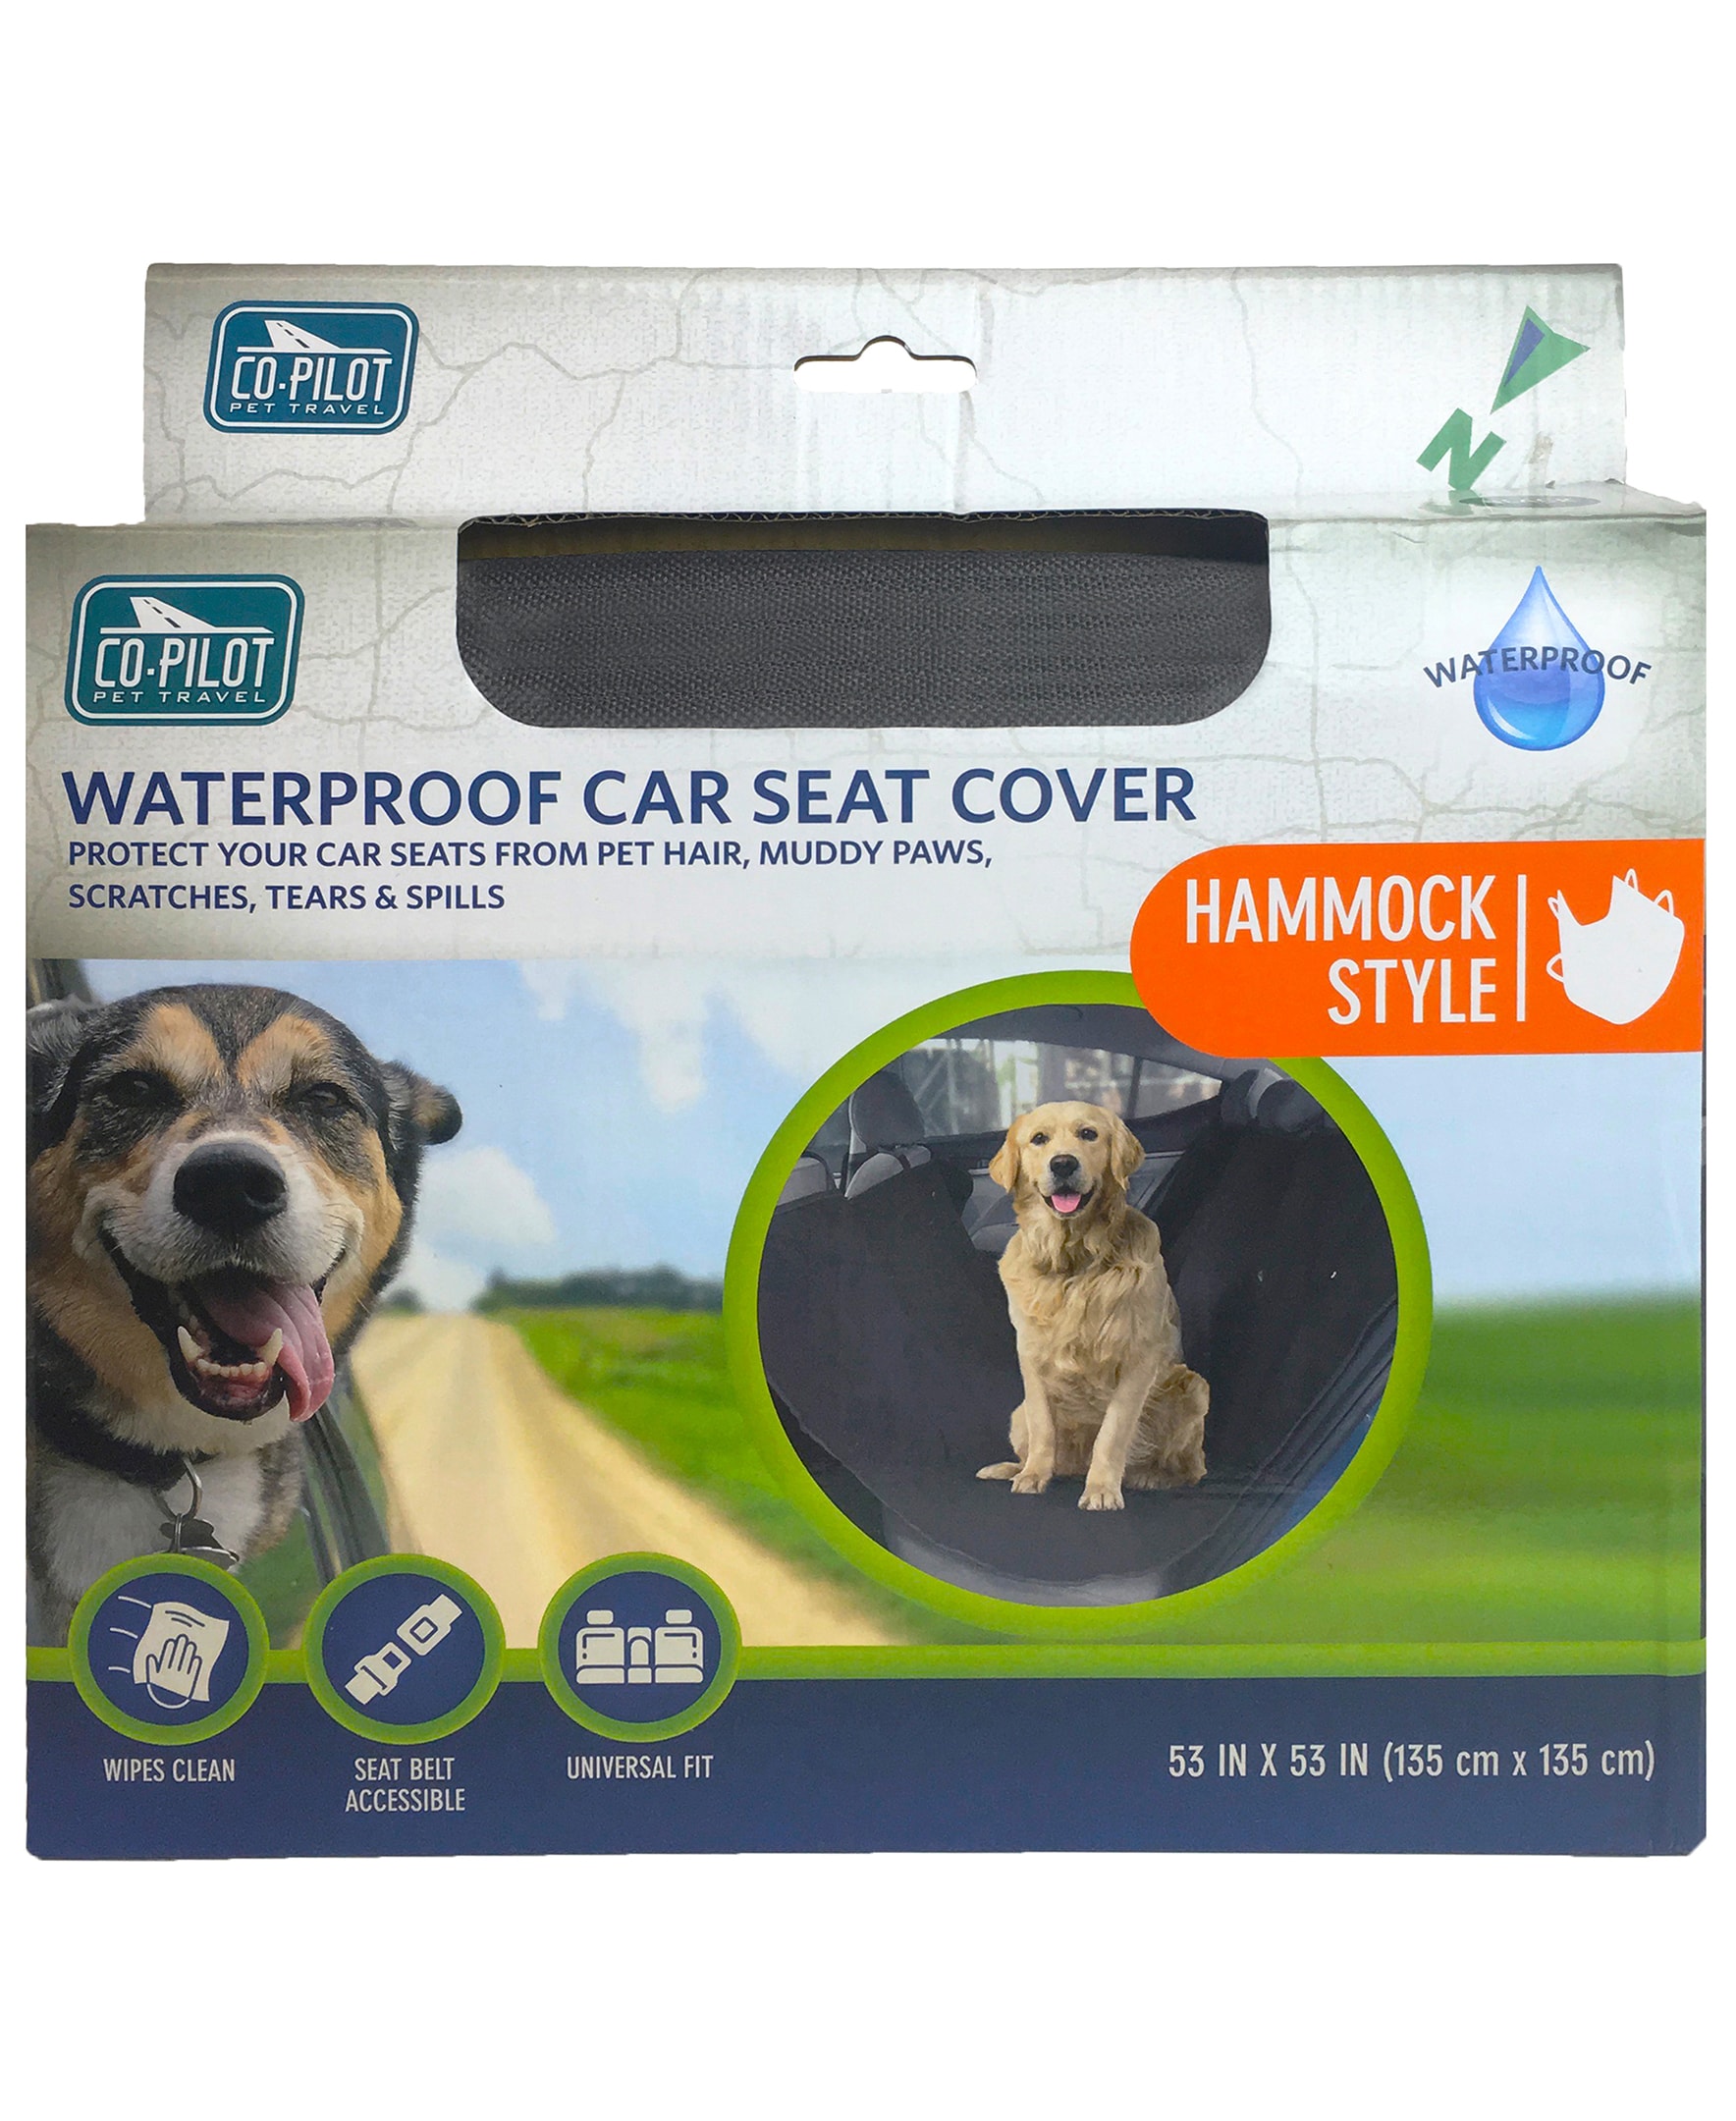 Dirty Dog Single Car Seat Cover and Hammock